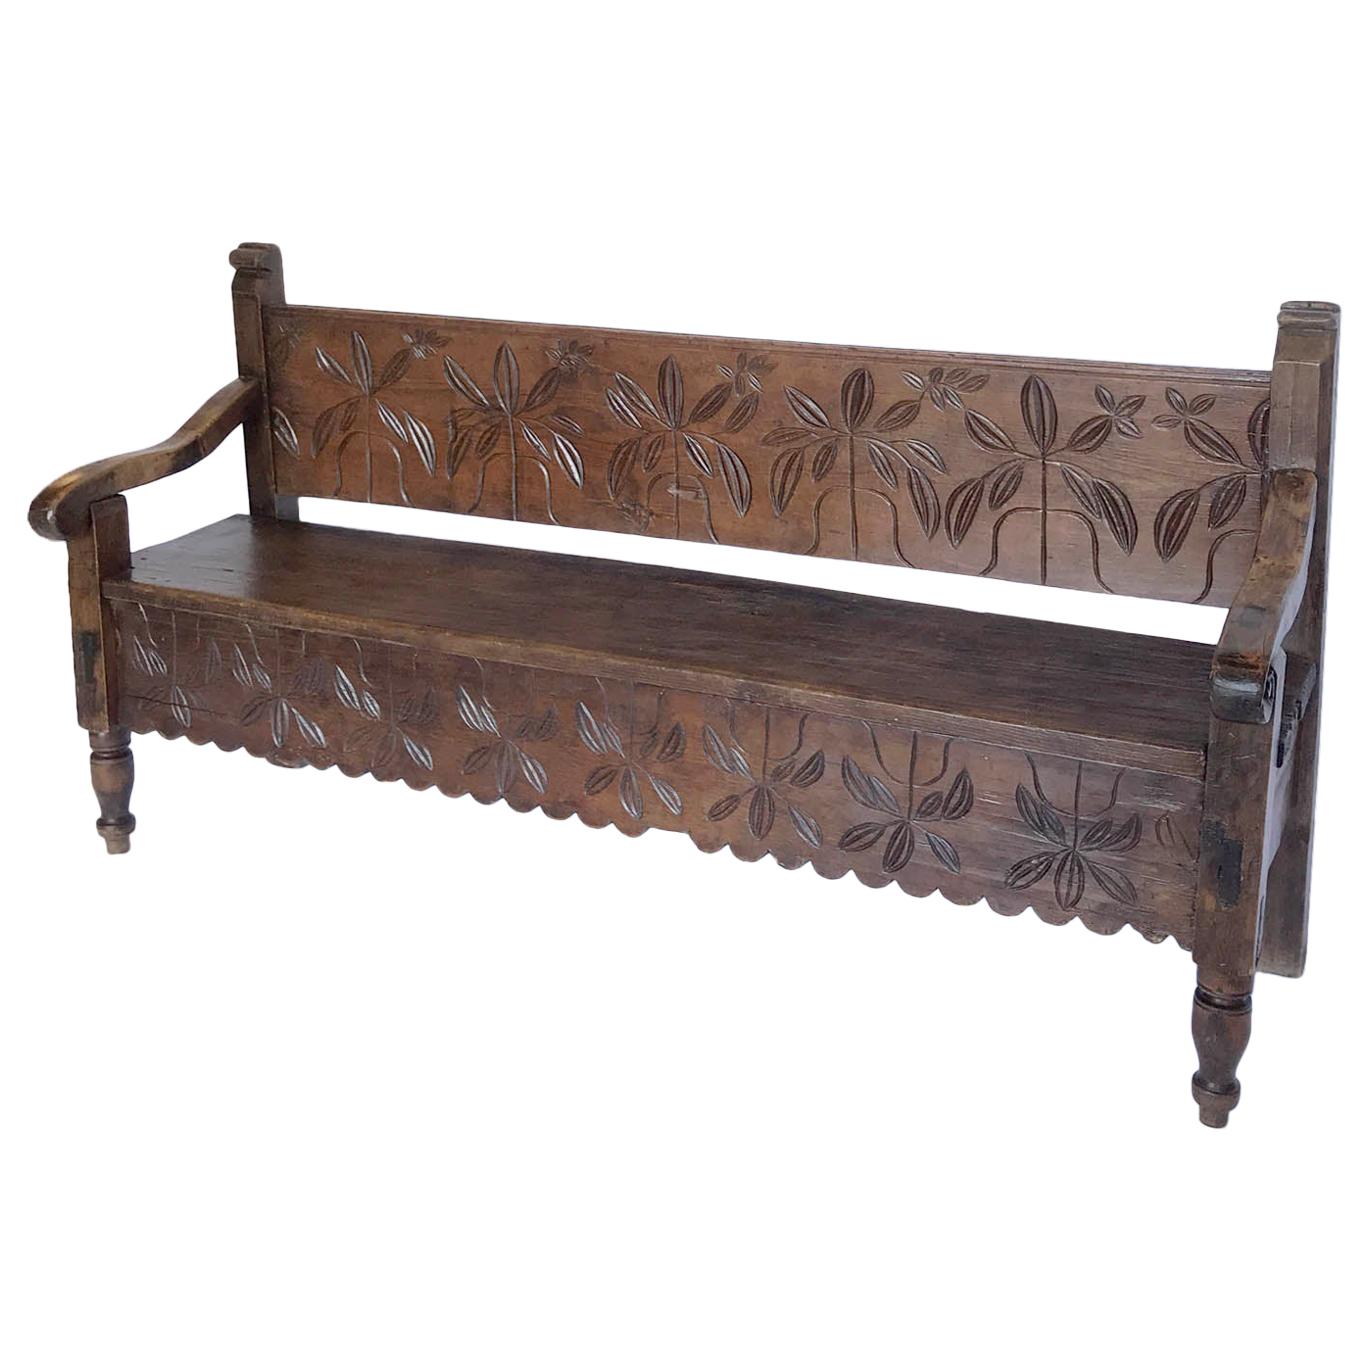 Carved Rustic Guatemalan Bench